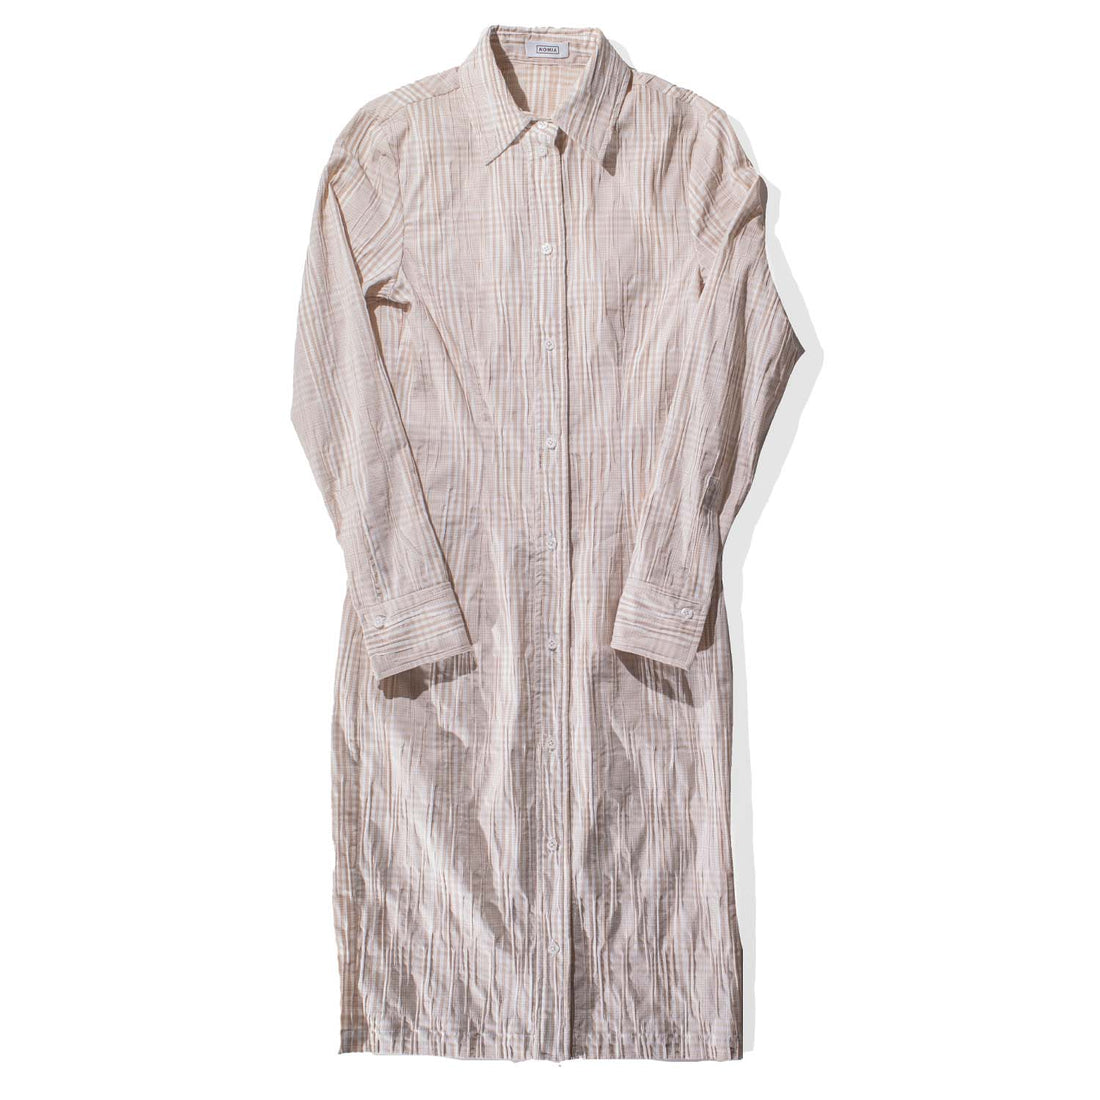 Nomia Fitted Shirtdress in Wheat and White